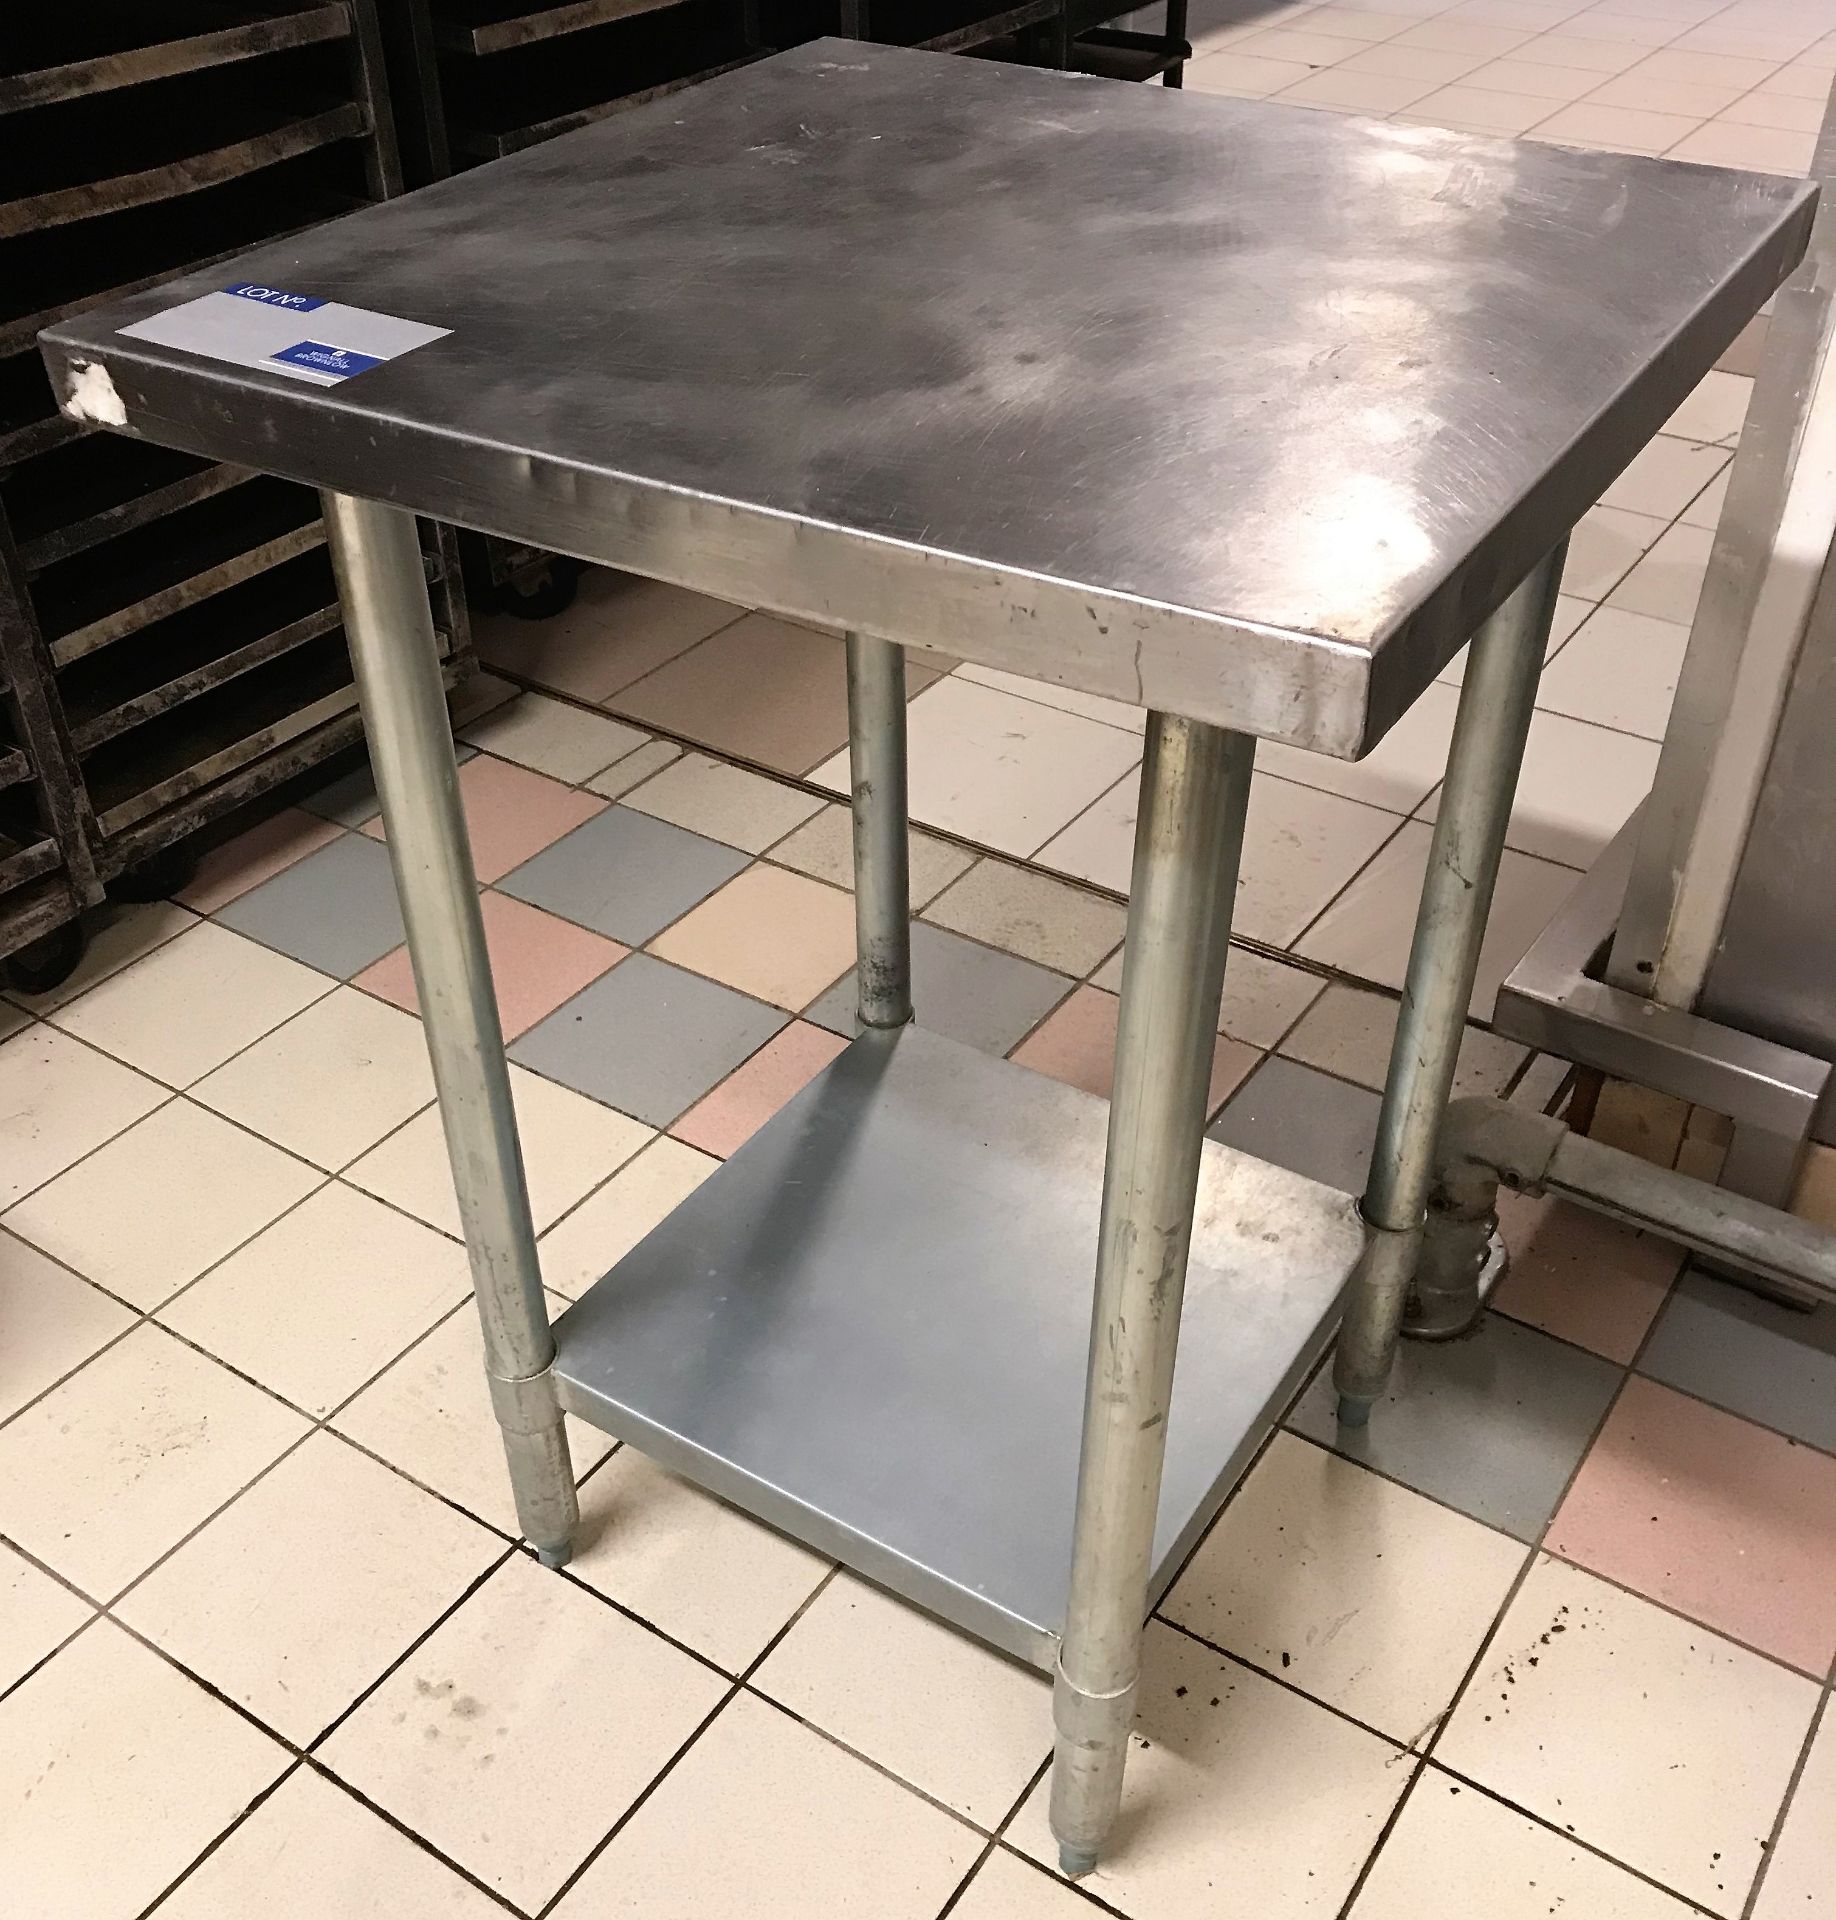 A Stainless Steel Stand, 60cm x 60cm x 90cm h.